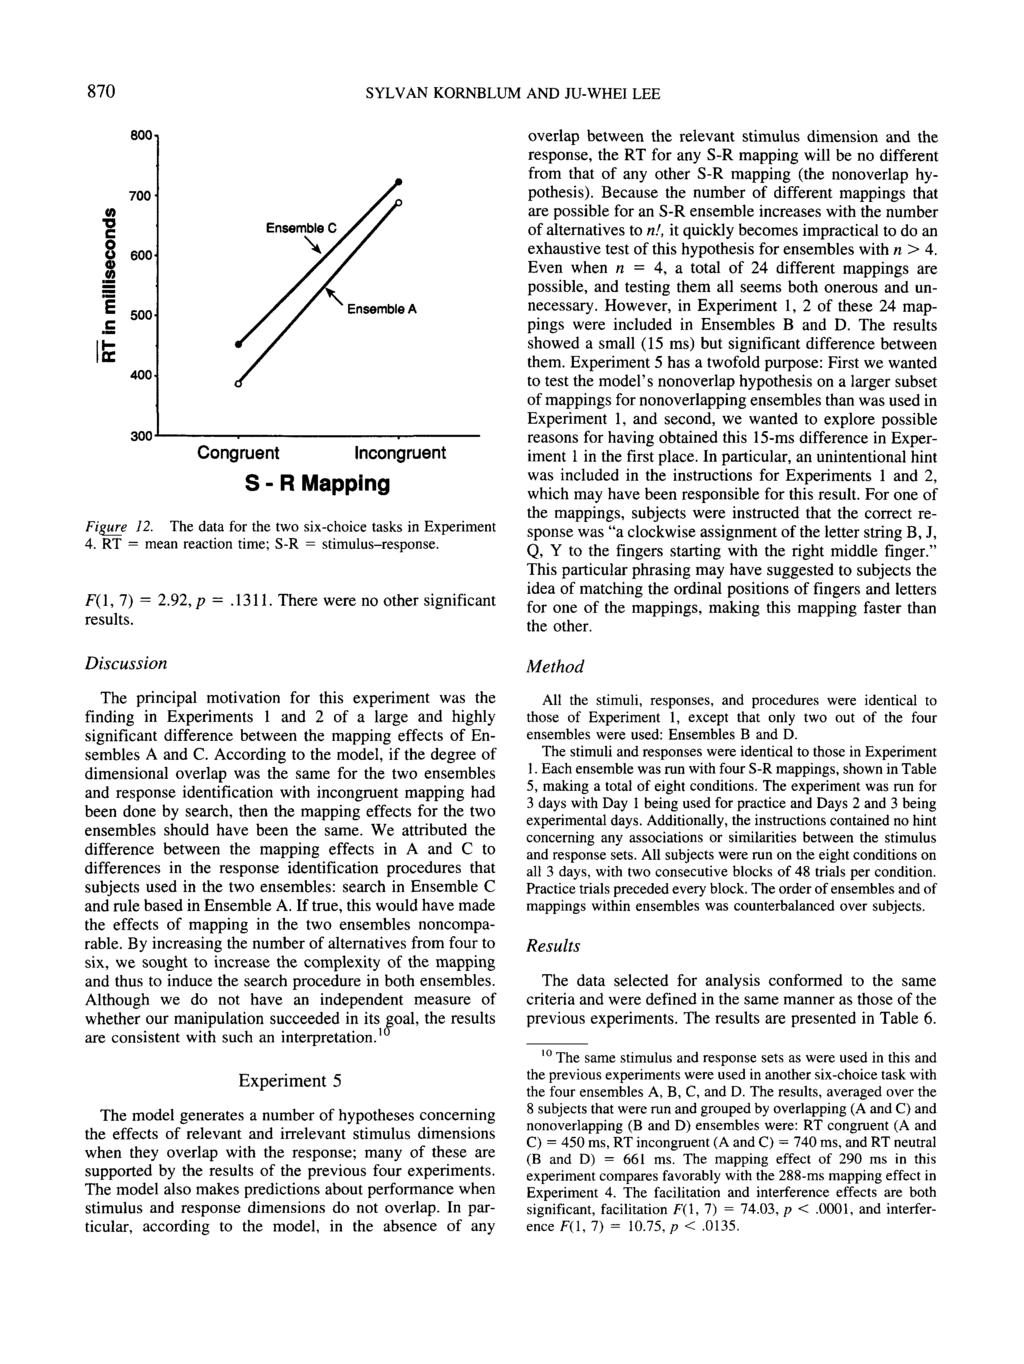 870 SYLVAN KORNBLUM AND JU-WHEI LEE 0) 800 700 U 600 ^ 500 'I 400 300 Congruent Ensemble C V Ensemble A S - R Mapping Incongruent Figure 12. The data for the two six-choice tasks in Experiment 4.